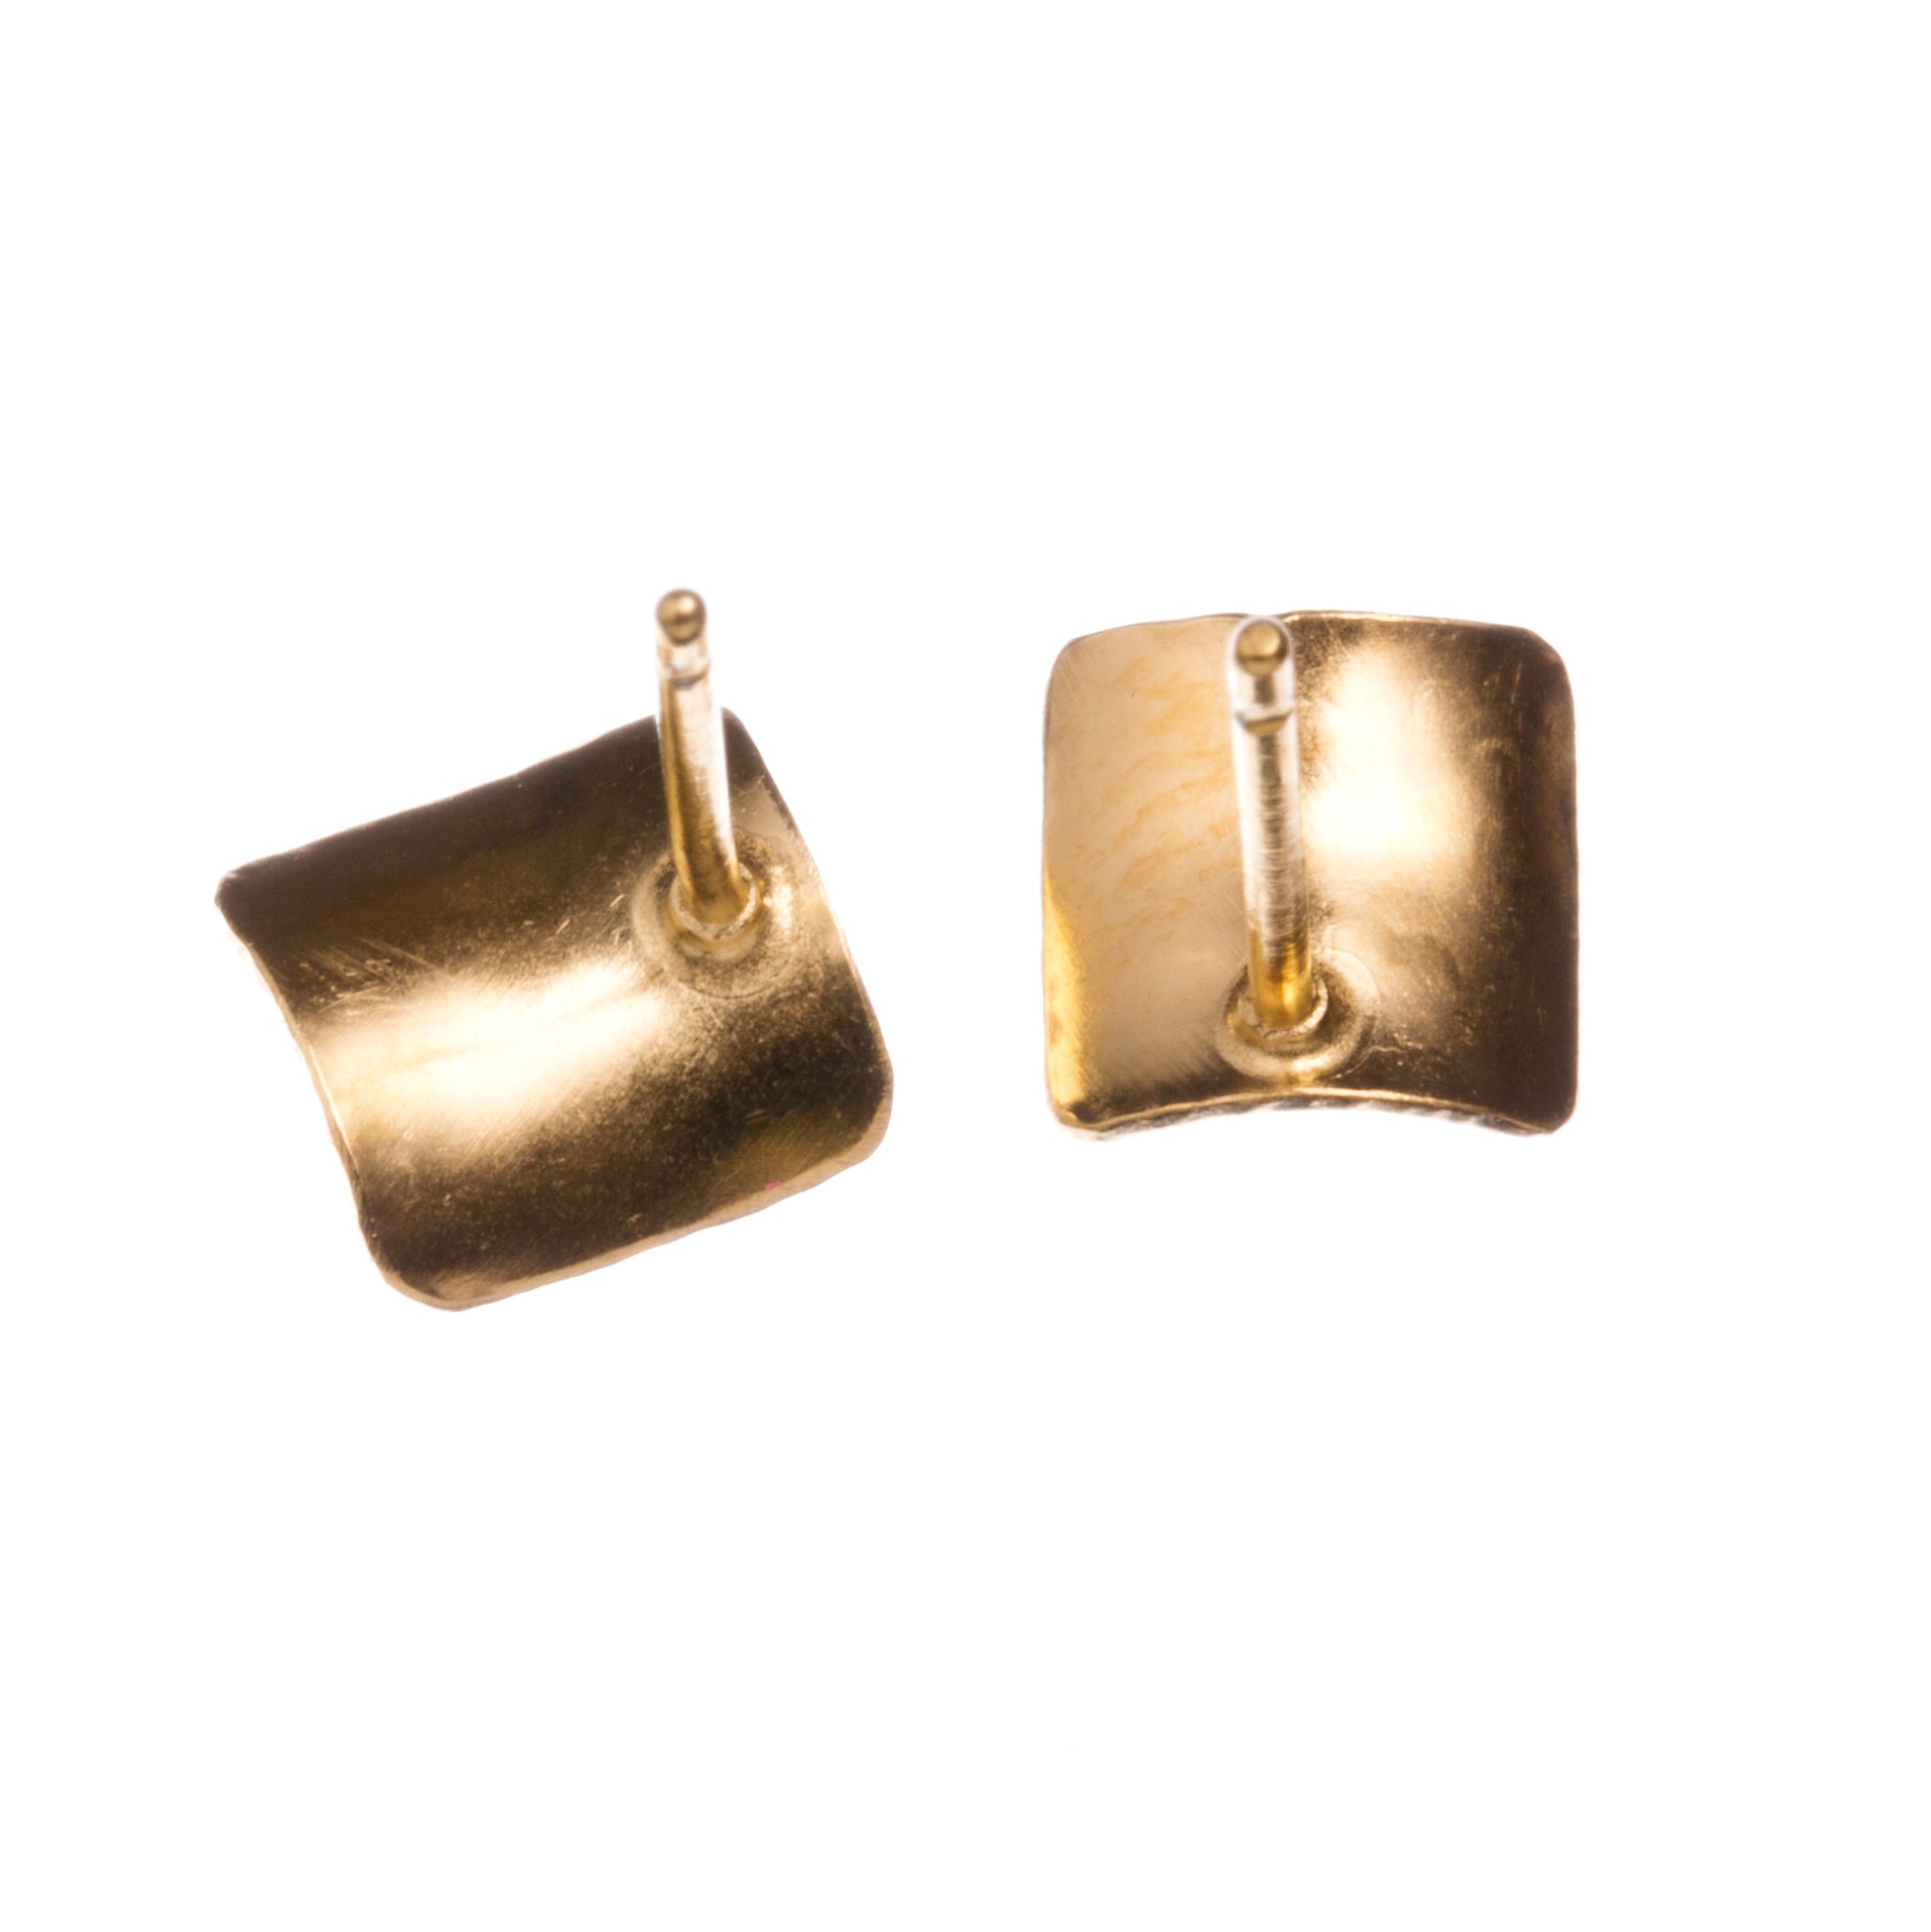 A pair of square silver earrings, studs, gold plated, with a subtle curve, a hammered texture and burnished edges. Showing the attachment at the back of the pins.